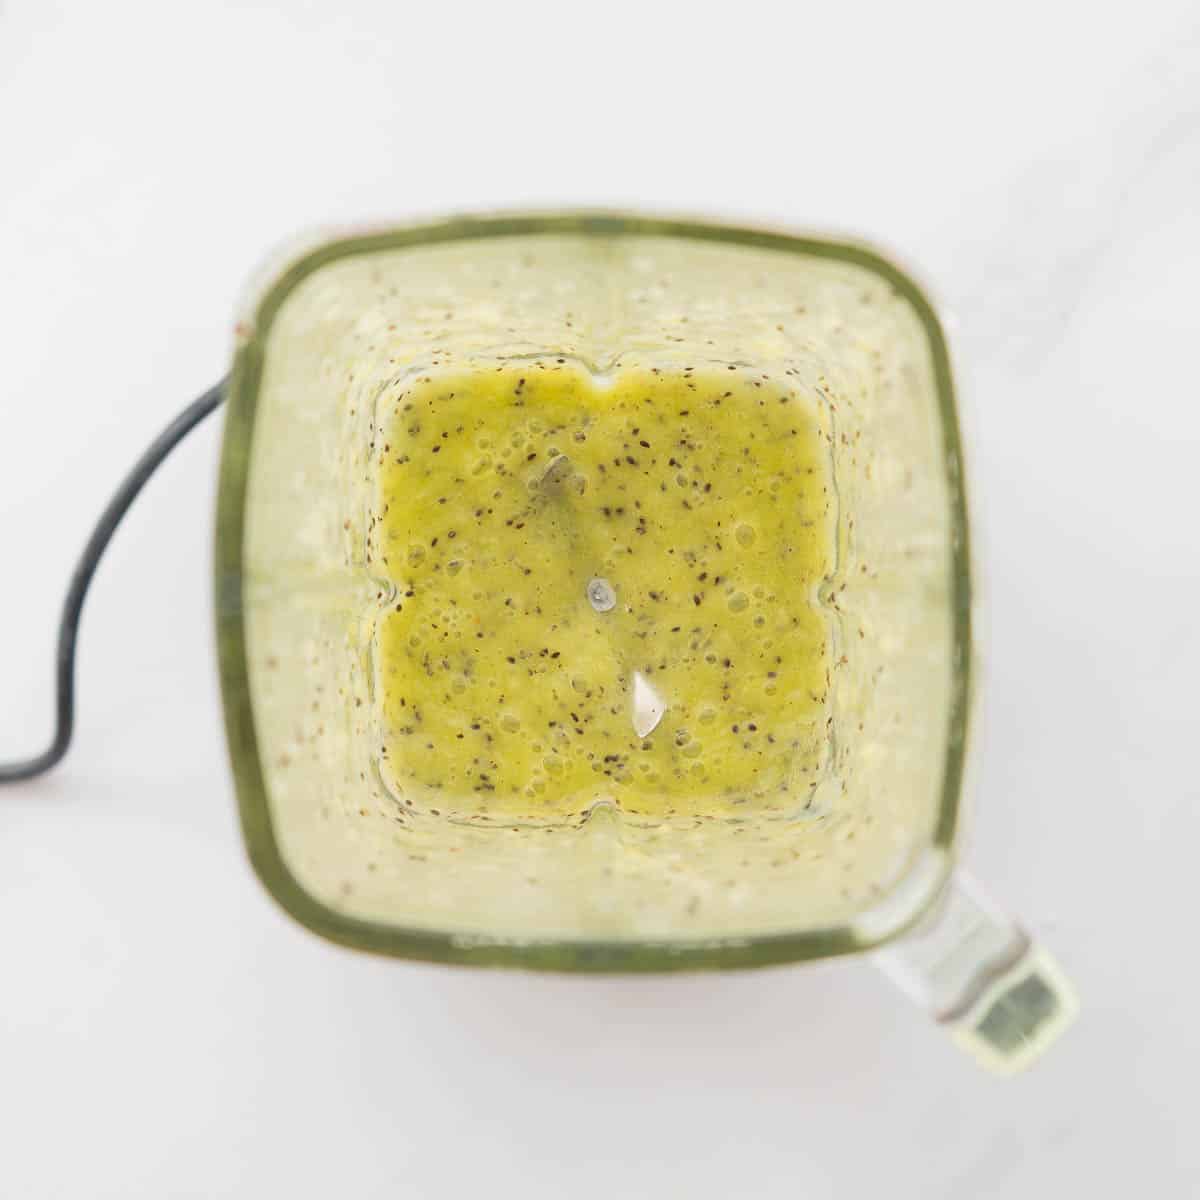 Kiwifruit puree in the bottom of a square glass blender jug.